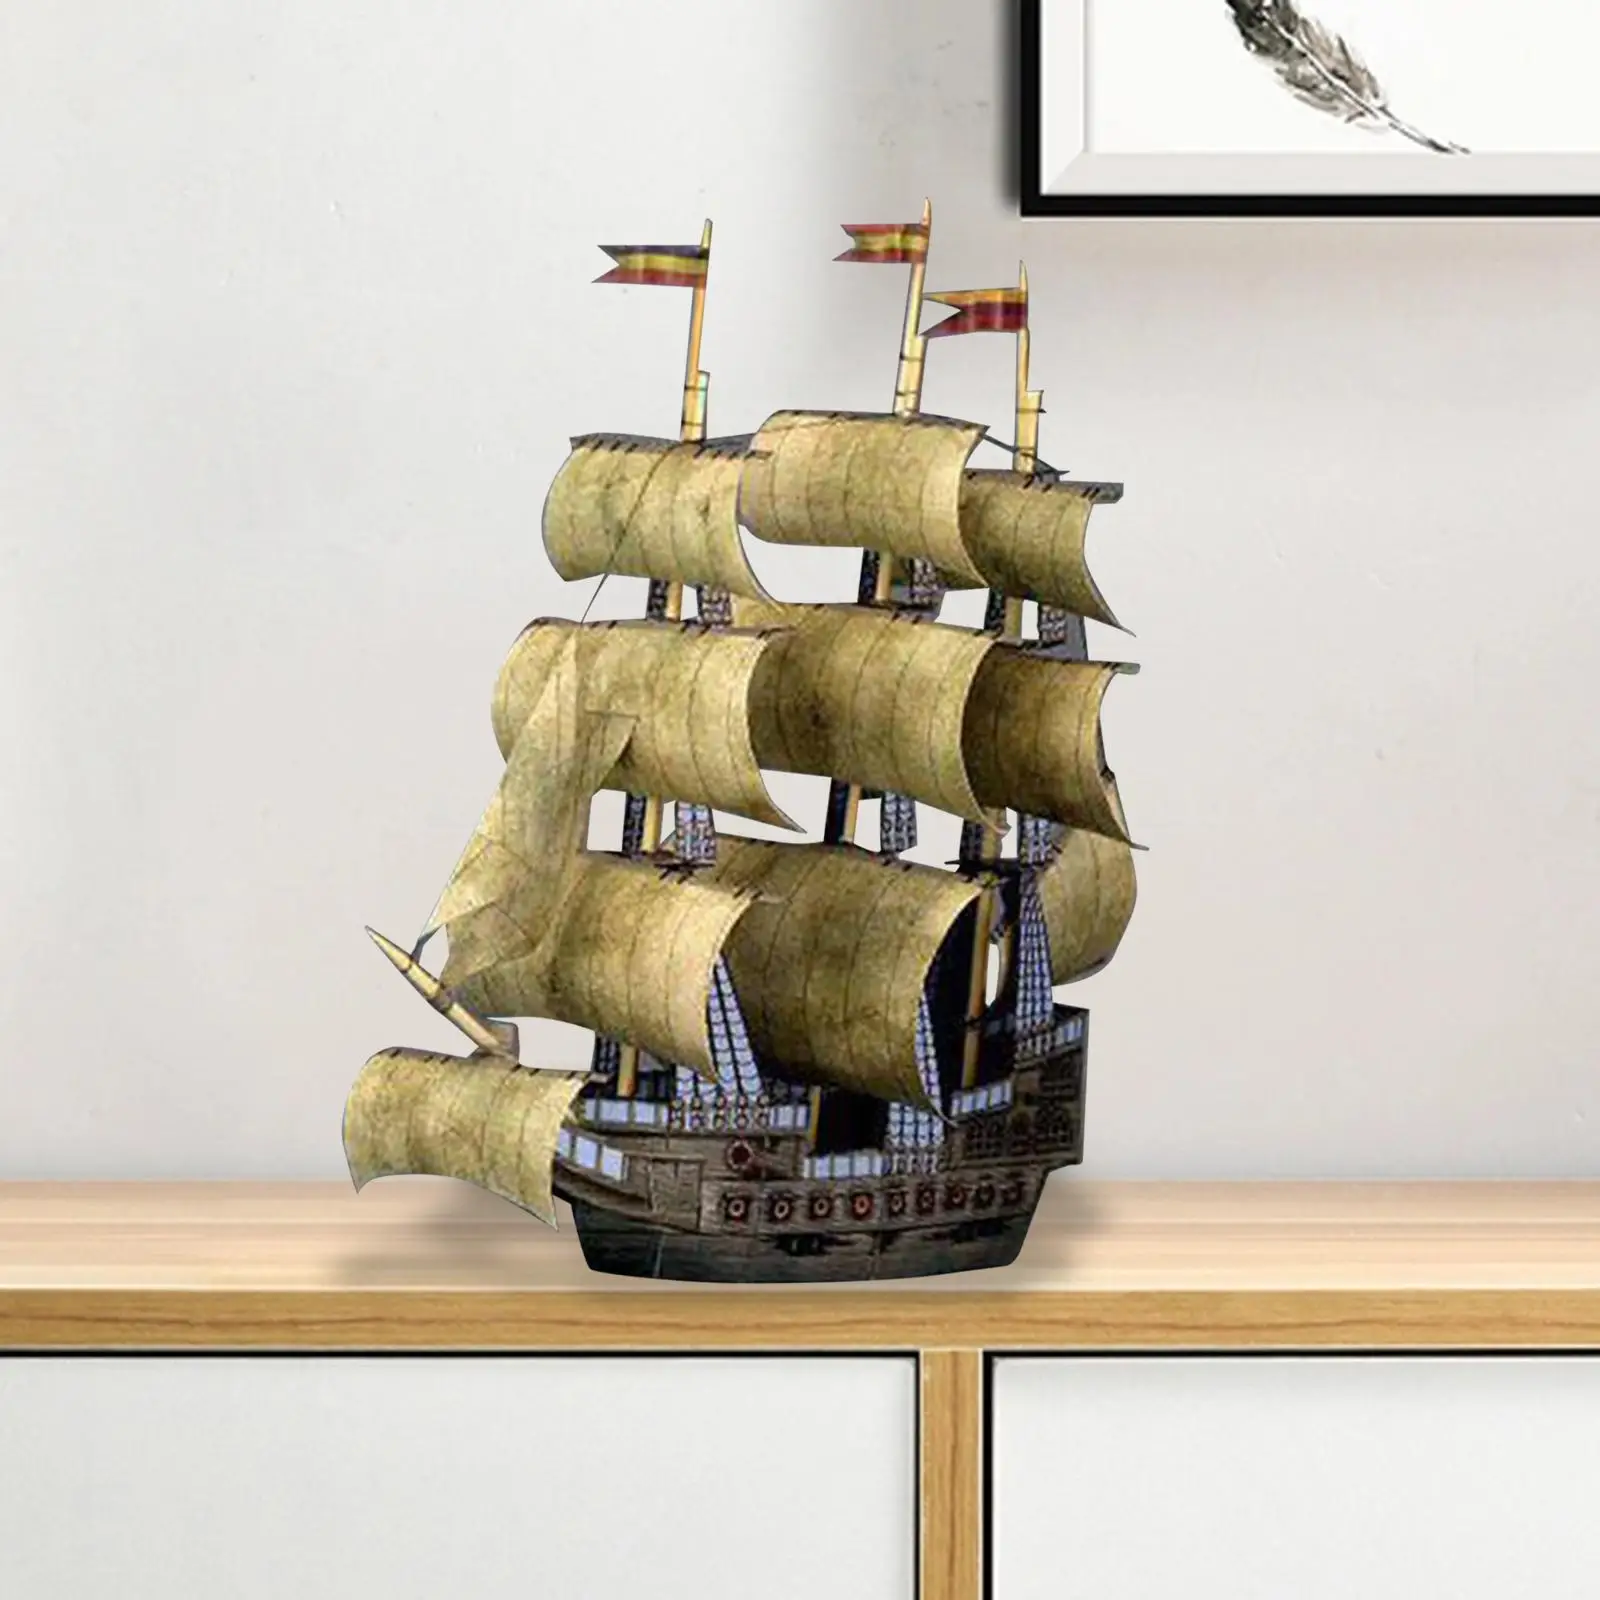 3D Paper Puzzle DIY Ship Craft Model Kits to Build for Adults 1:200 Scale